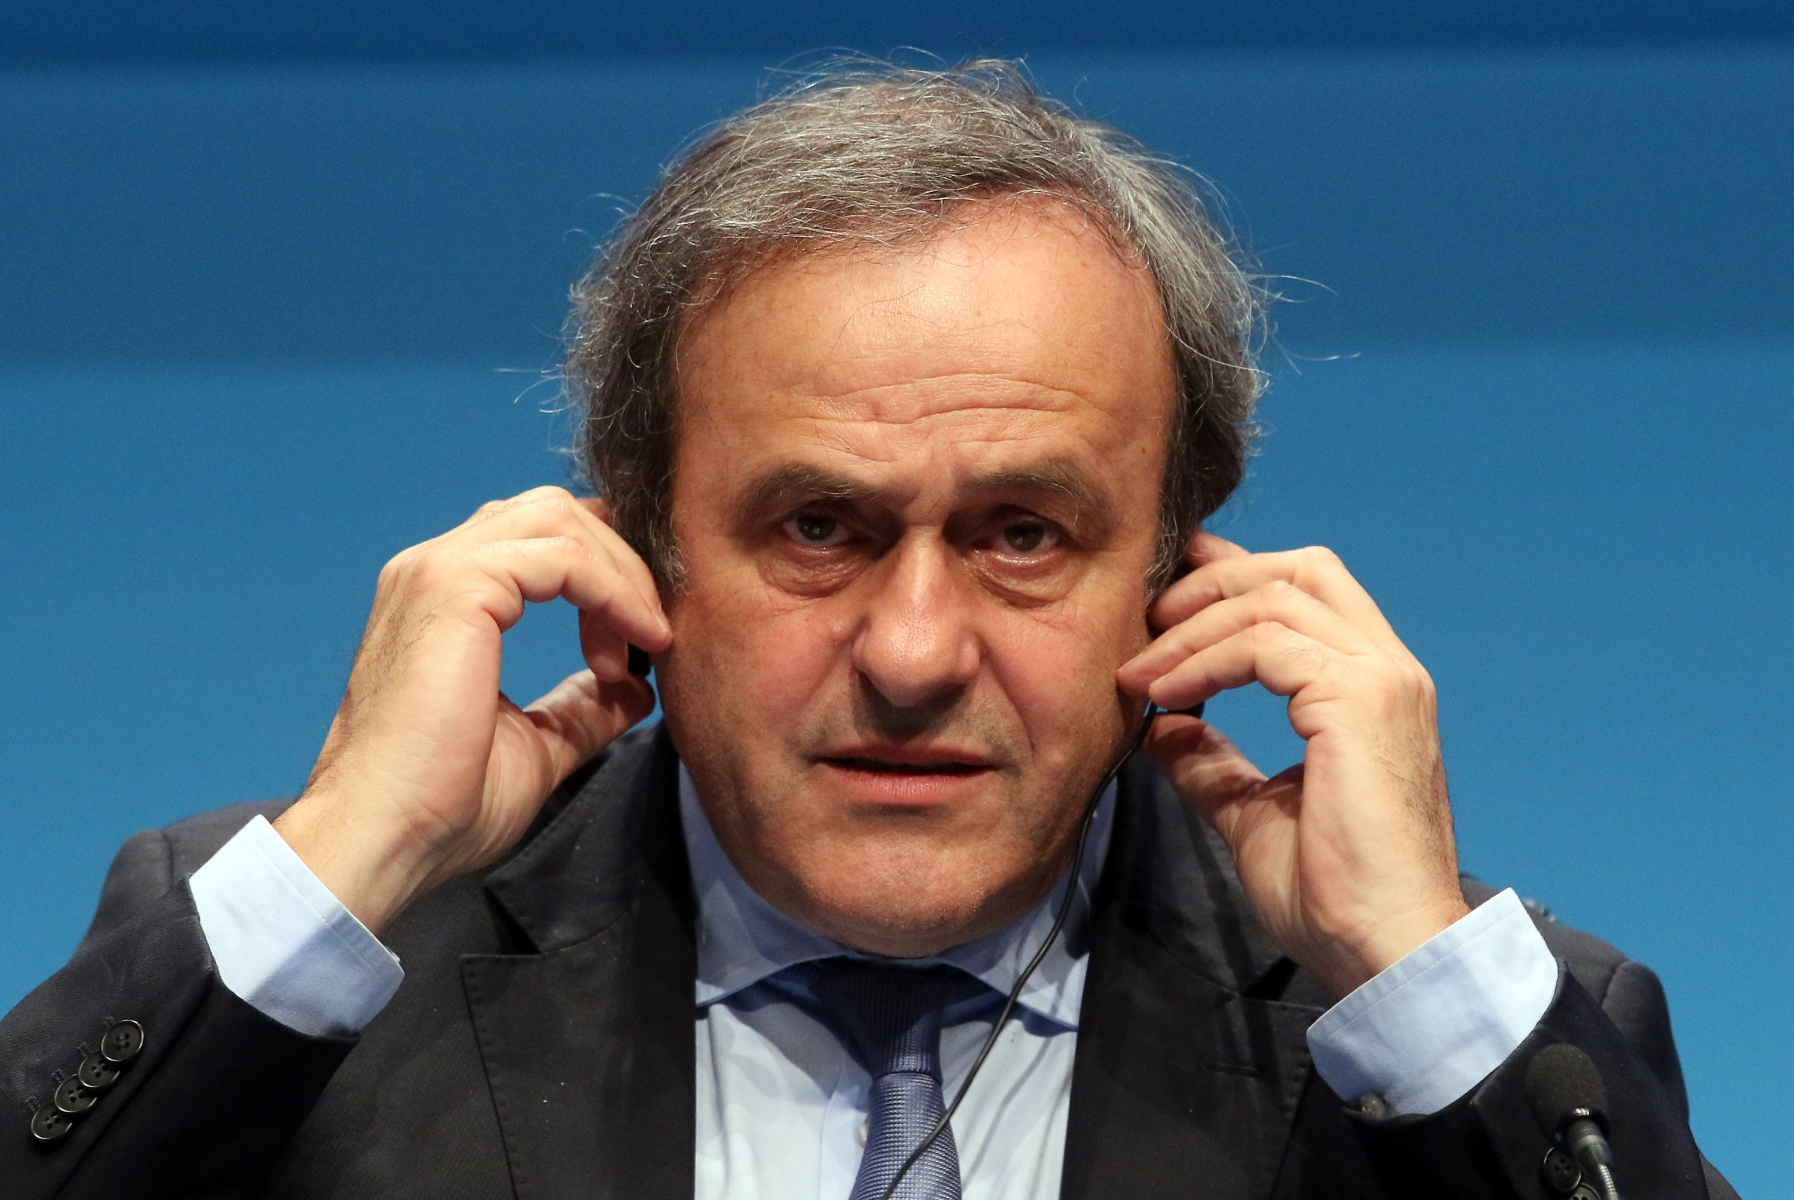 FILE - In this March 24, 2015 file photo UEFA President Michel Platini speaks during a news conference at the end of the 39th Ordinary UEFA Congress in Vienna, Austria. Platini's lawyer said Tuesday, Nov. 24, 2015 that FIFA ethics committee requests life ban for UEFA president Michel Platini. (AP Photo/Ronald Zak, file)6 SOCCER FIFA PLATINI